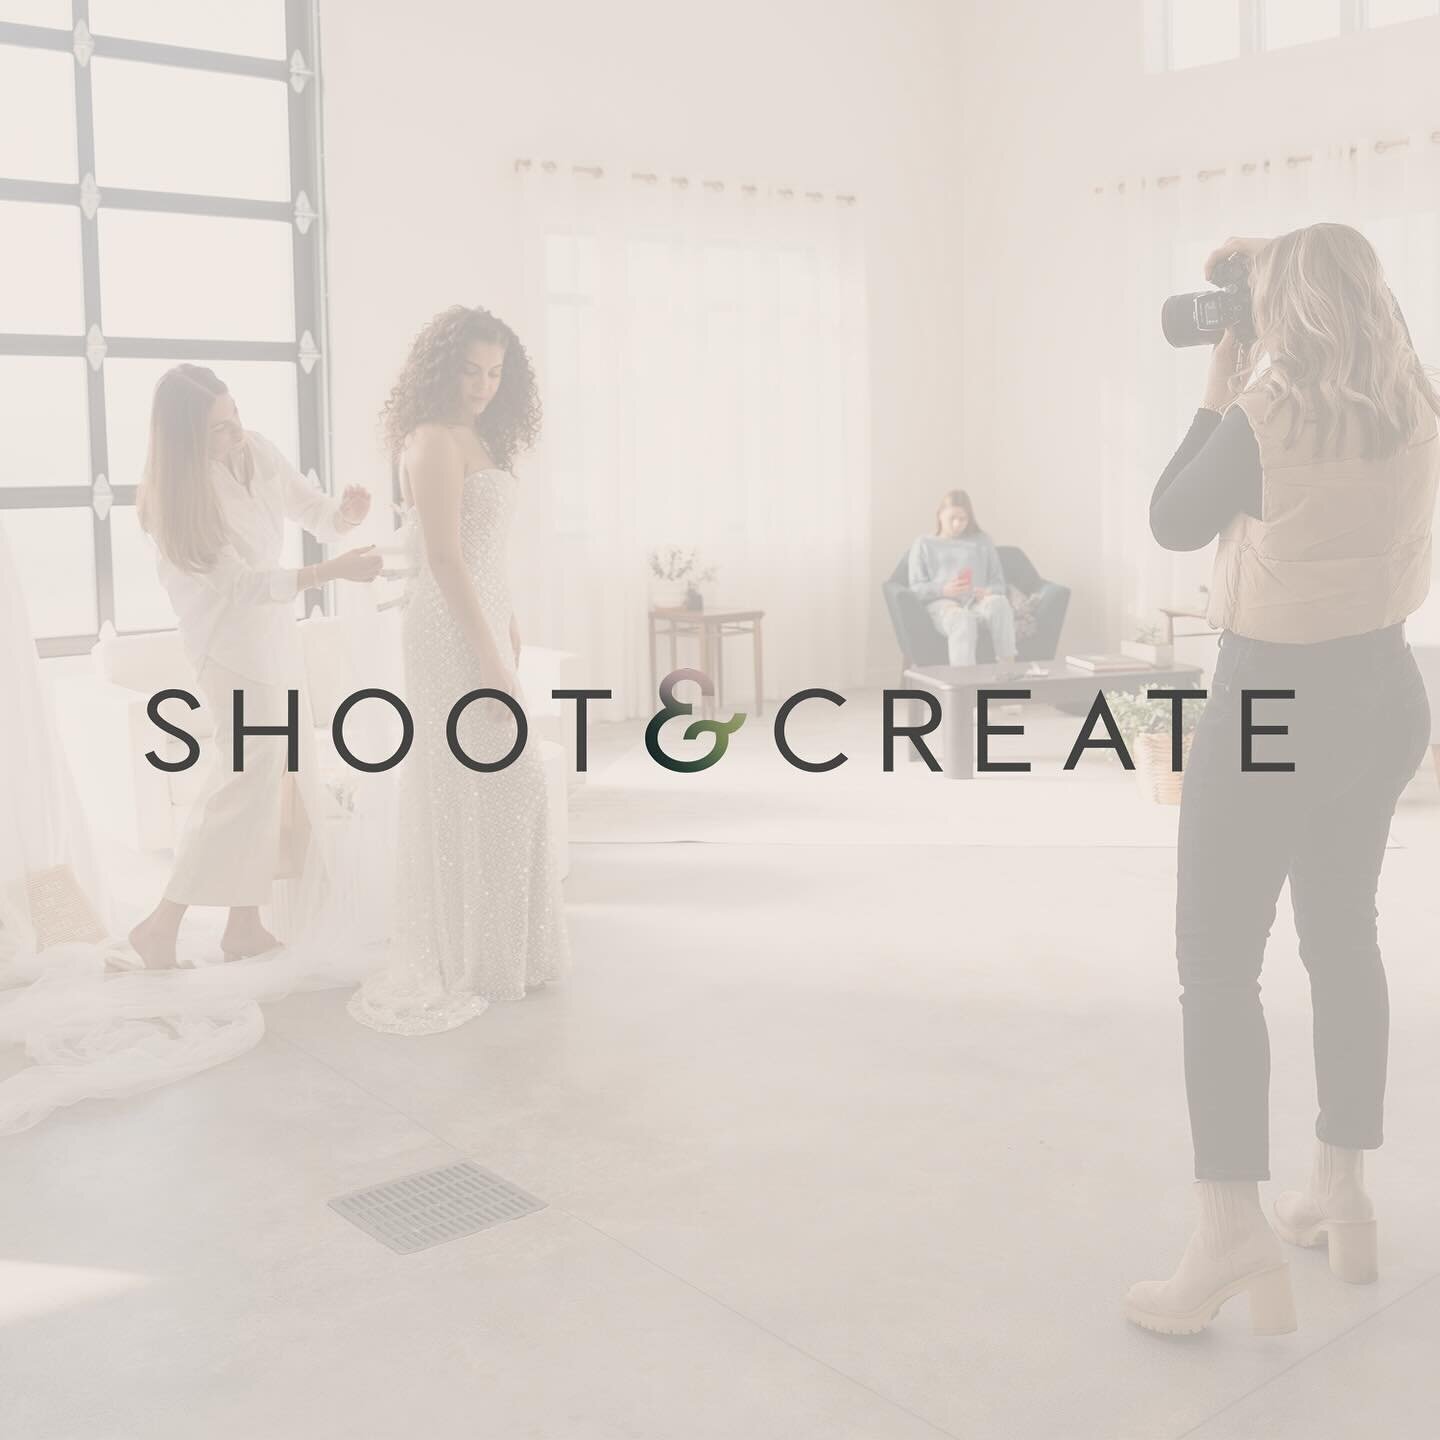 Who&rsquo;s ready to Shoot &amp; Create at Studio Borealis? 📸✨

Exciting news! Our website is LIVE, and now you can effortlessly book the studio for your own sessions online. 🌟

Get ready to bring your creative visions to life at Studio Borealis &n